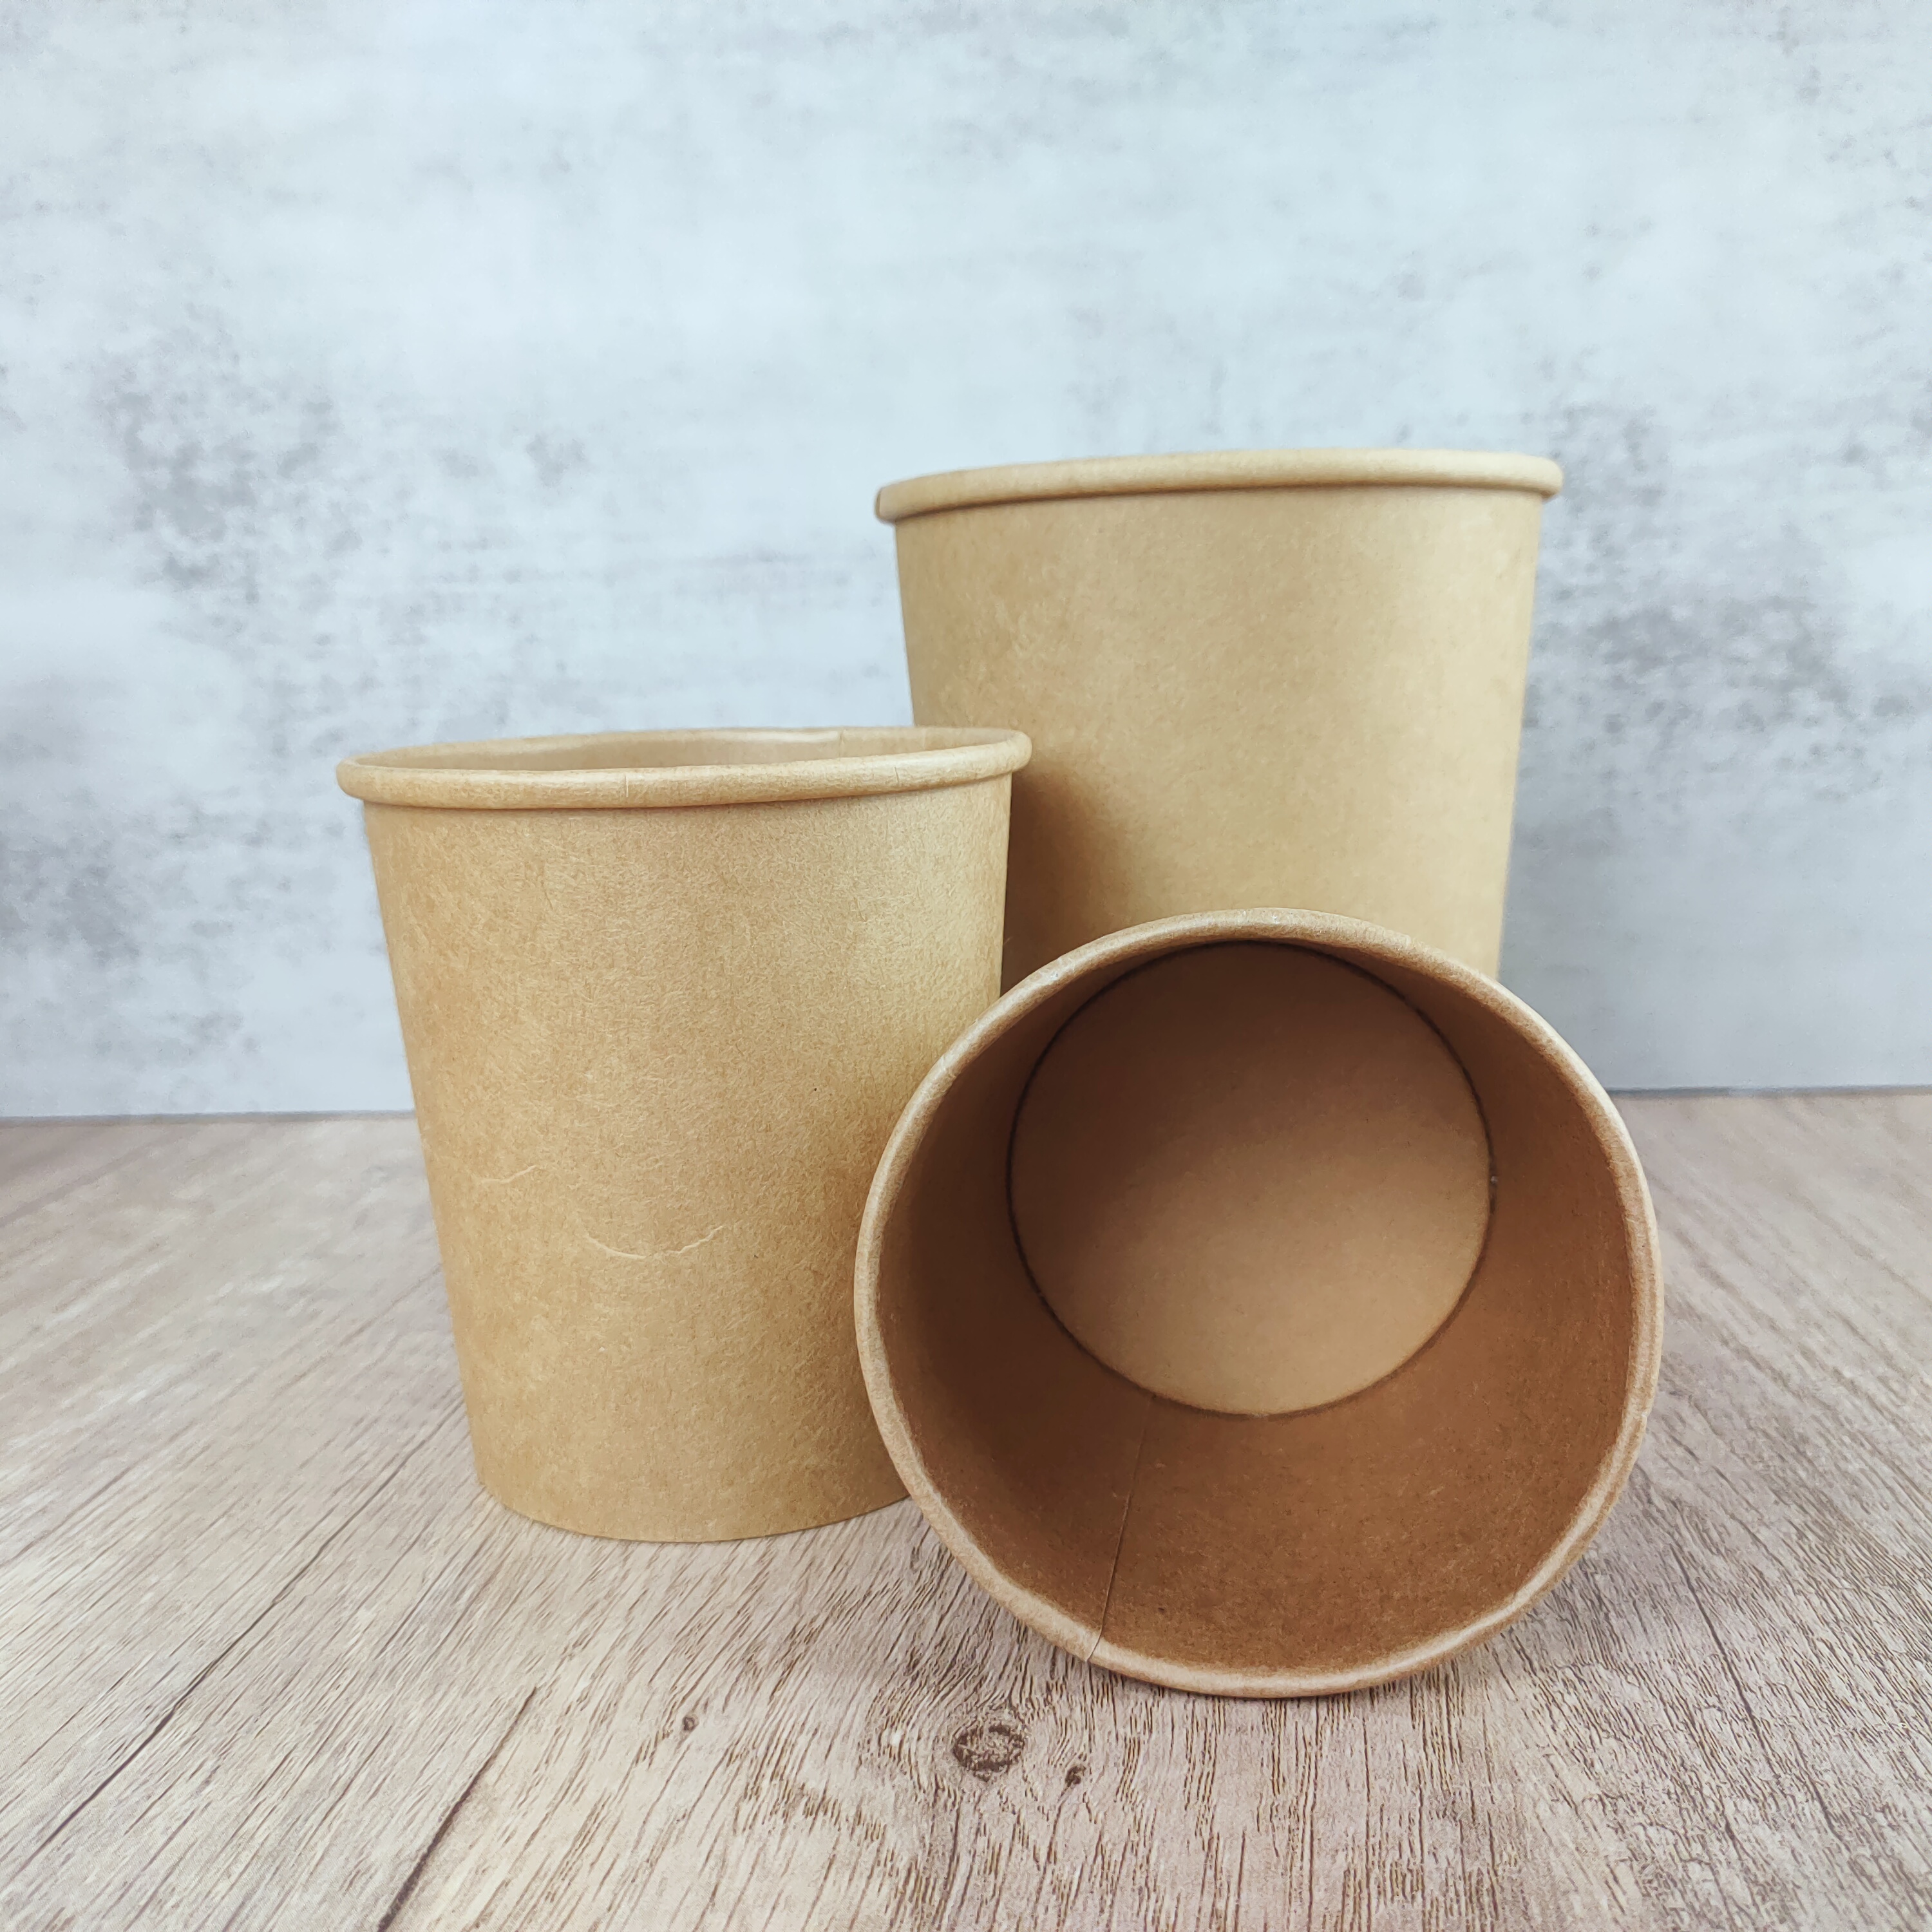 Kraft Paper Bowls Disposable Salad Bowls Disposable Round Bowls Paper Cups To Serve Food Suitable for Party Gym 